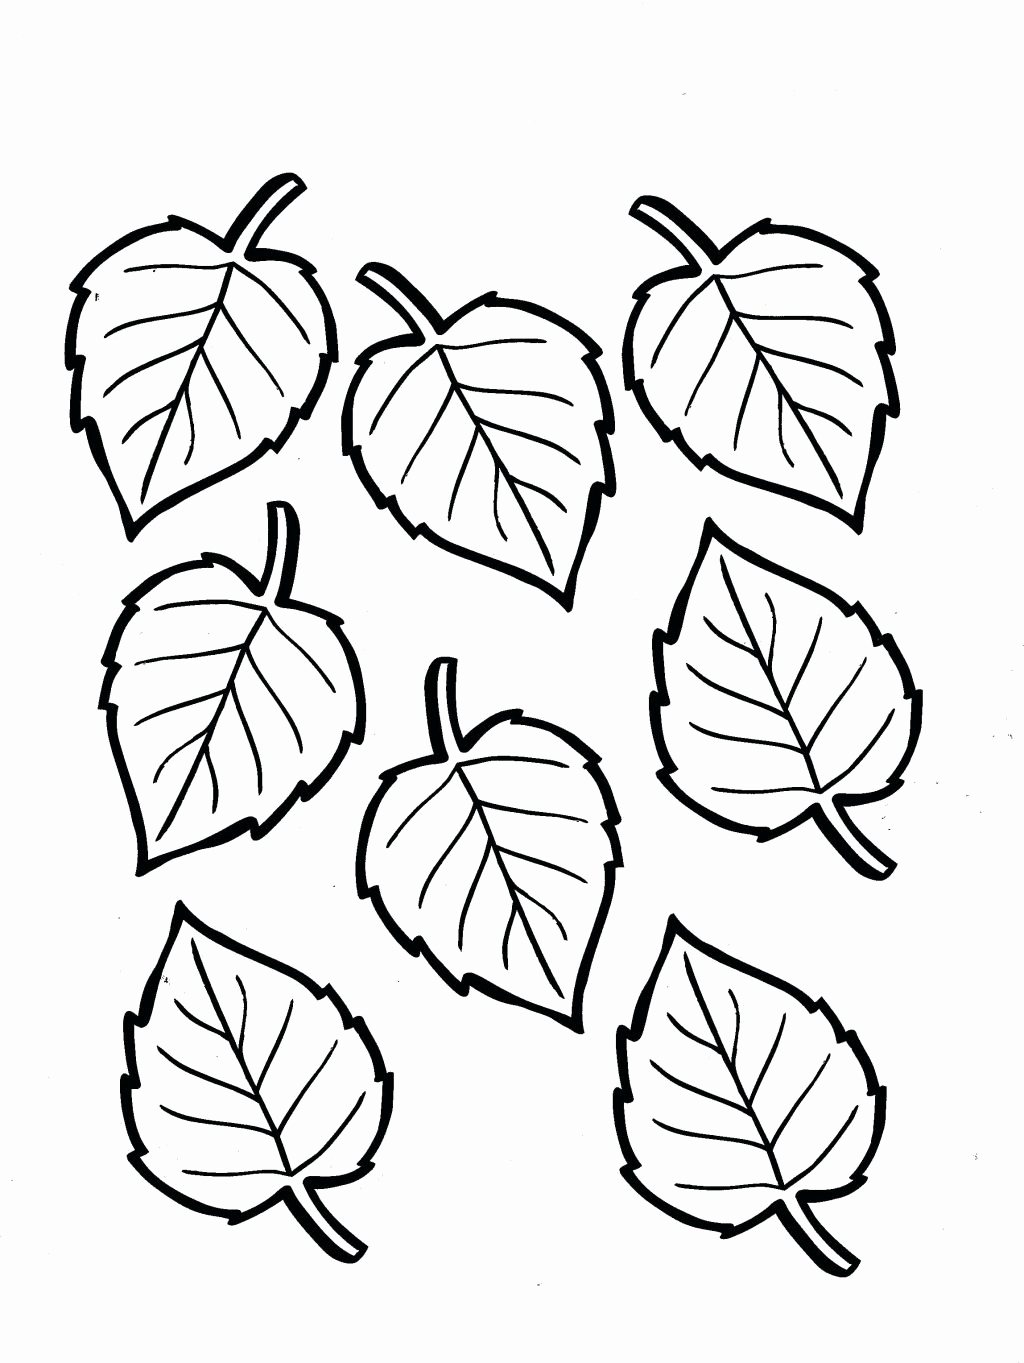 coloring page fall leaf coloring pages autumn for preschoolers fall leaf coloring pages